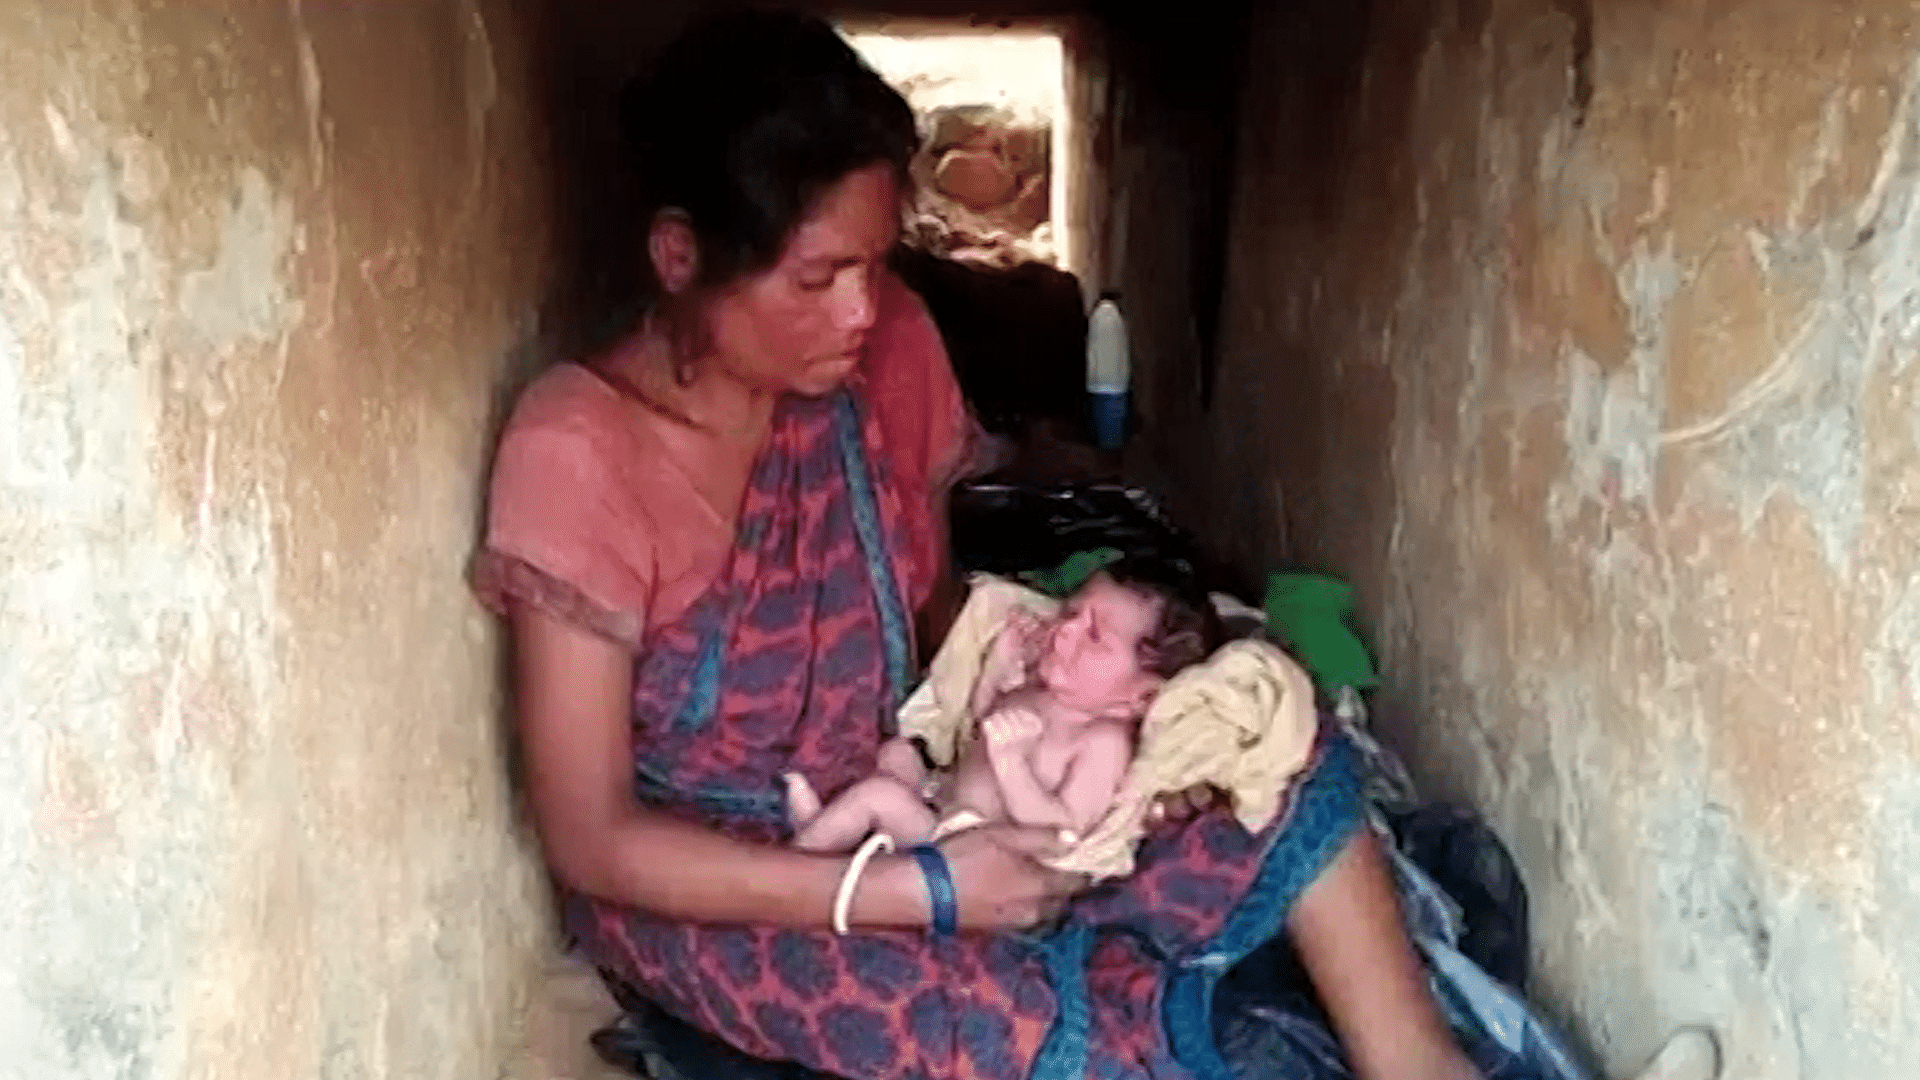 A woman gives birth in a culvert in Mayurbhanj district of Odisha